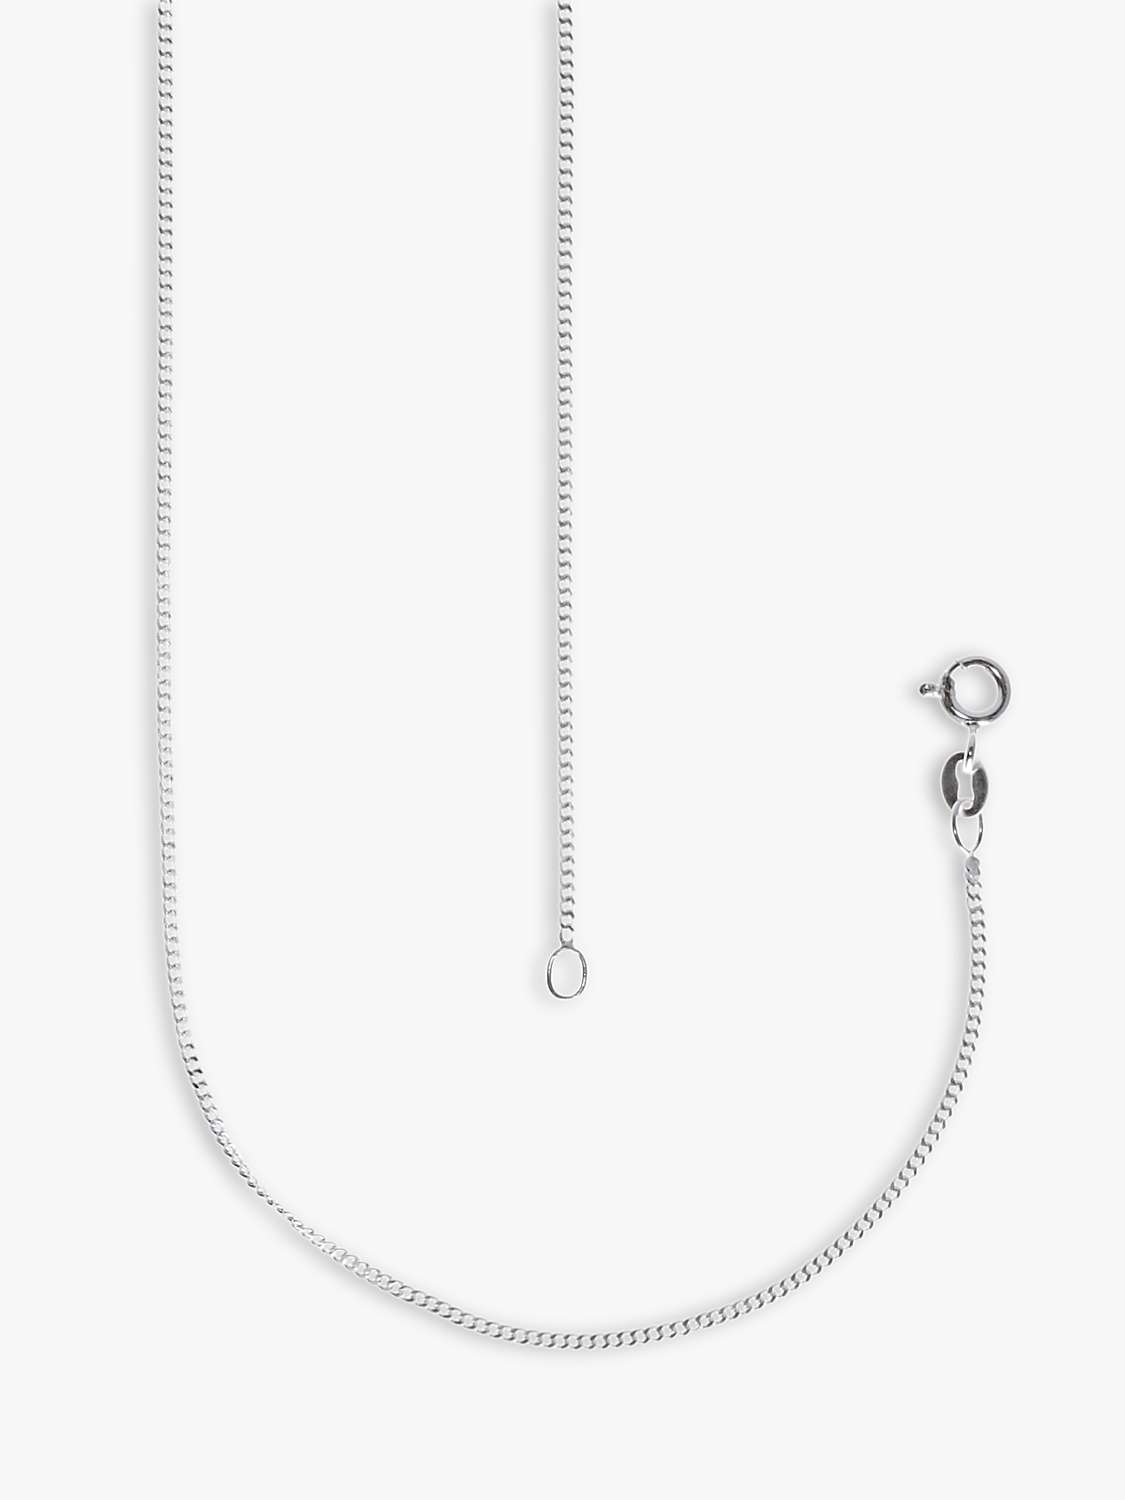 Buy Nina B Curb Chain Necklace, Silver Online at johnlewis.com